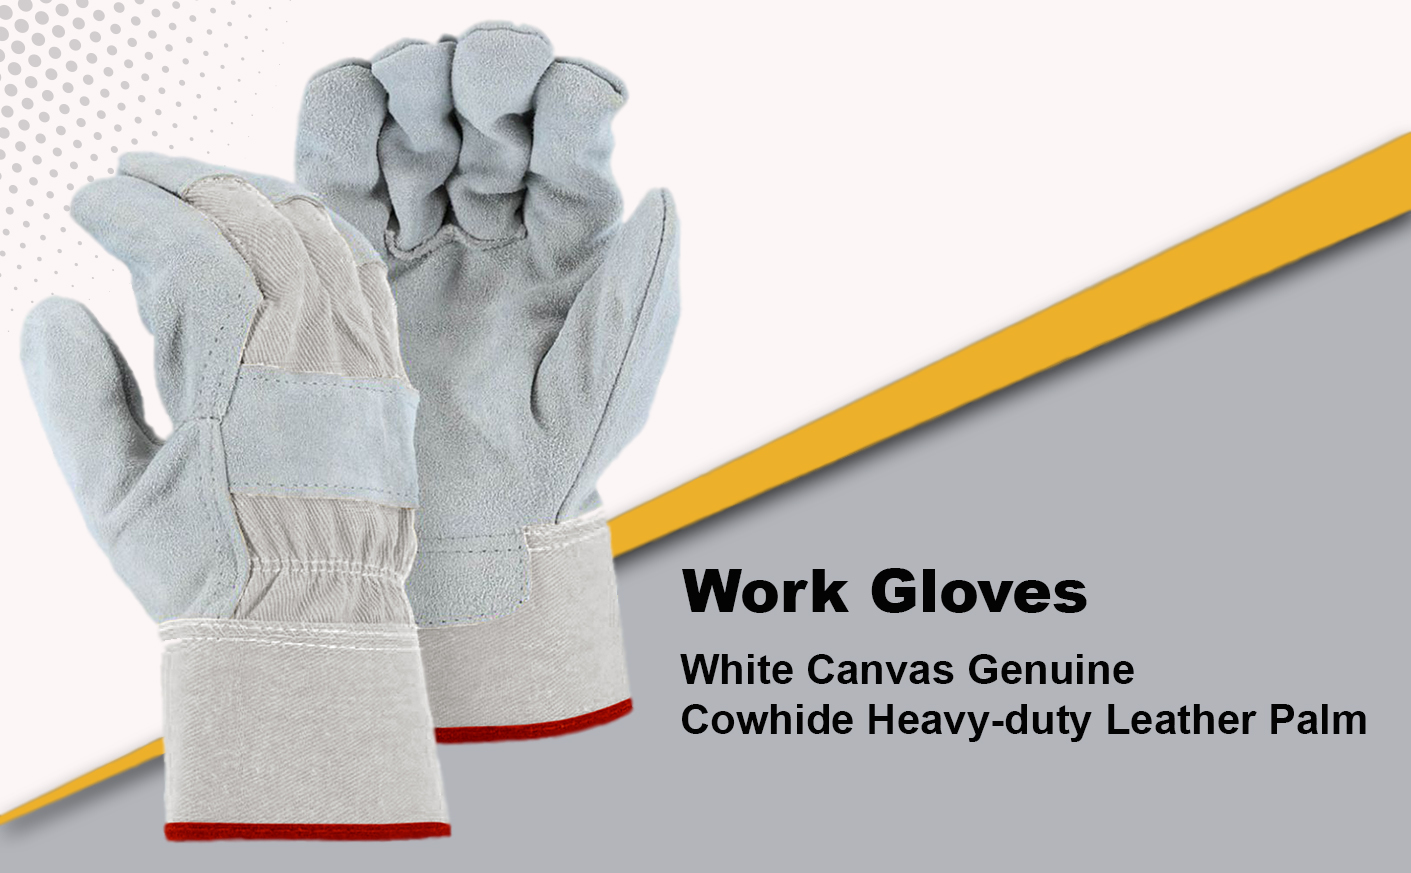 WOLF White Canvas Genuine Grade A Cowhide Heavy-duty Shoulder Leather Palm Work Gloves with Wing Thumb/Index Finger and Safety Cuff Quick One Safety